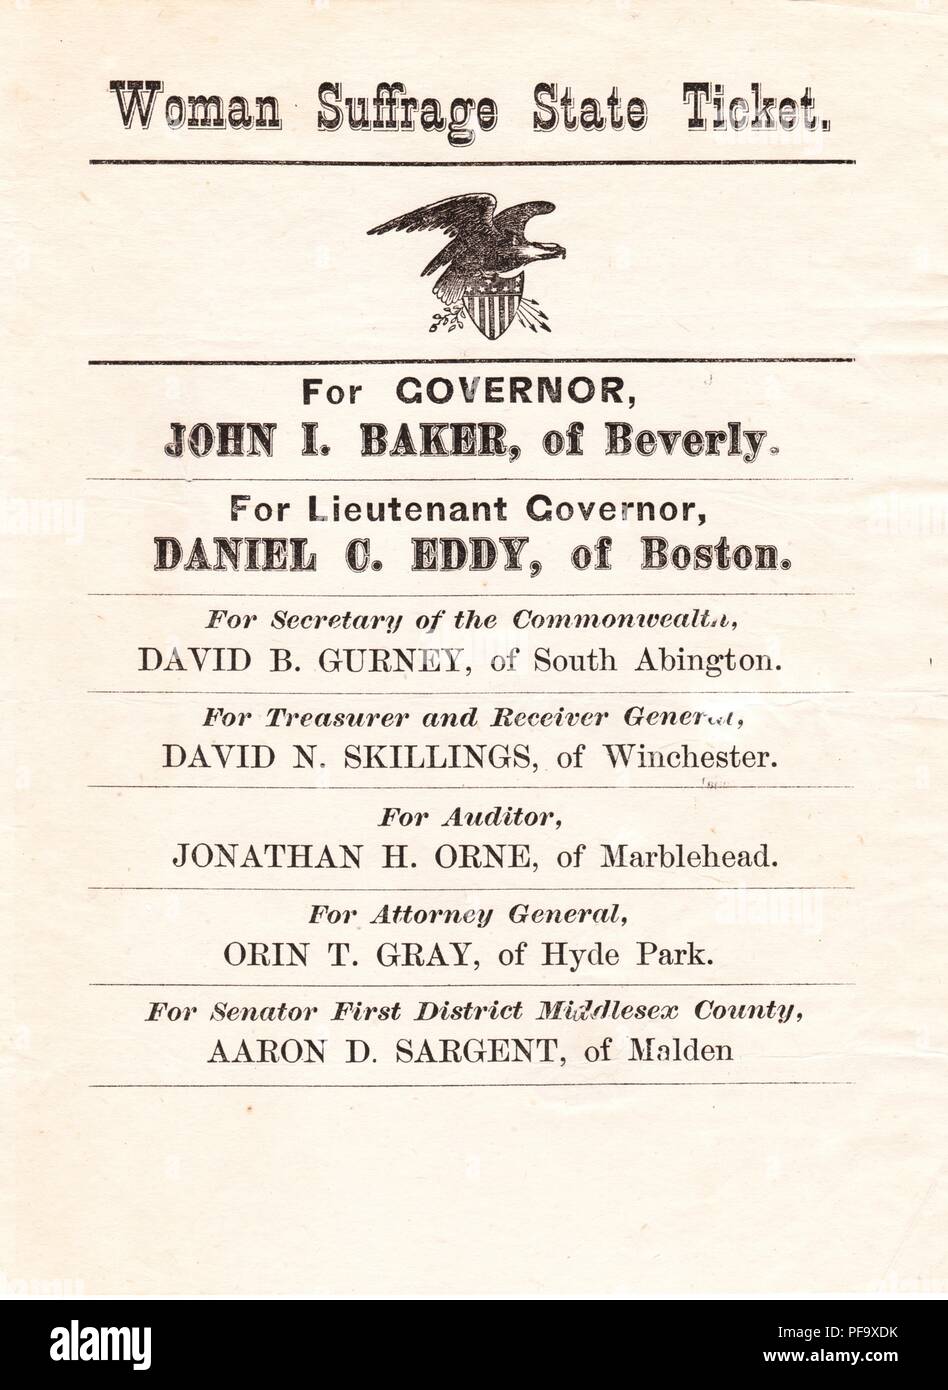 Black and white, Massachusetts suffrage ticket campaign poster, listing the male, candidates pledged to the cause, including John L Baker for governor, and Daniel C Eddy for lieutenant governor, along with David B Gurney, David N Skillings, Jonathan H Orne, Orin T Gray, and Aaron D Sargent, printed for the American market, in 1876. () Stock Photo